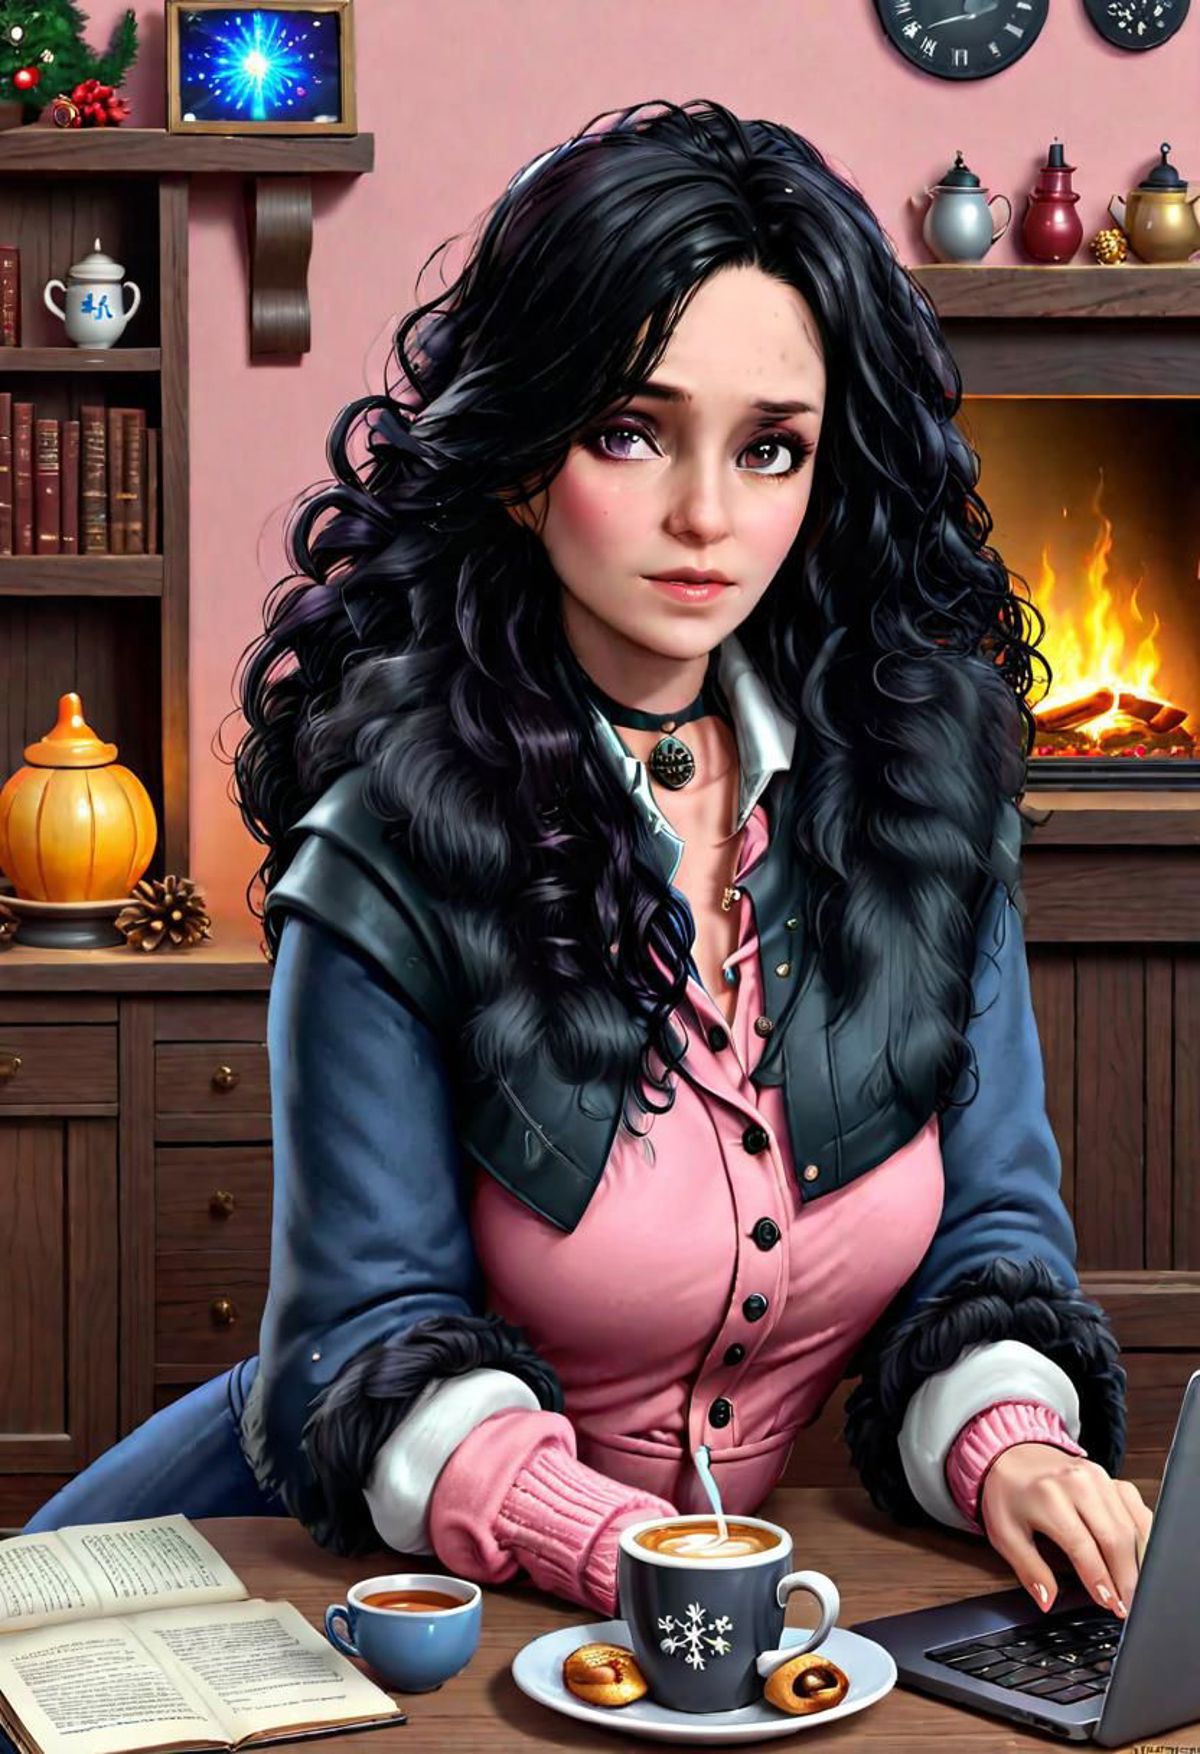 Yennefer (Witcher 3 Game) SDXL image by Pinksorceress